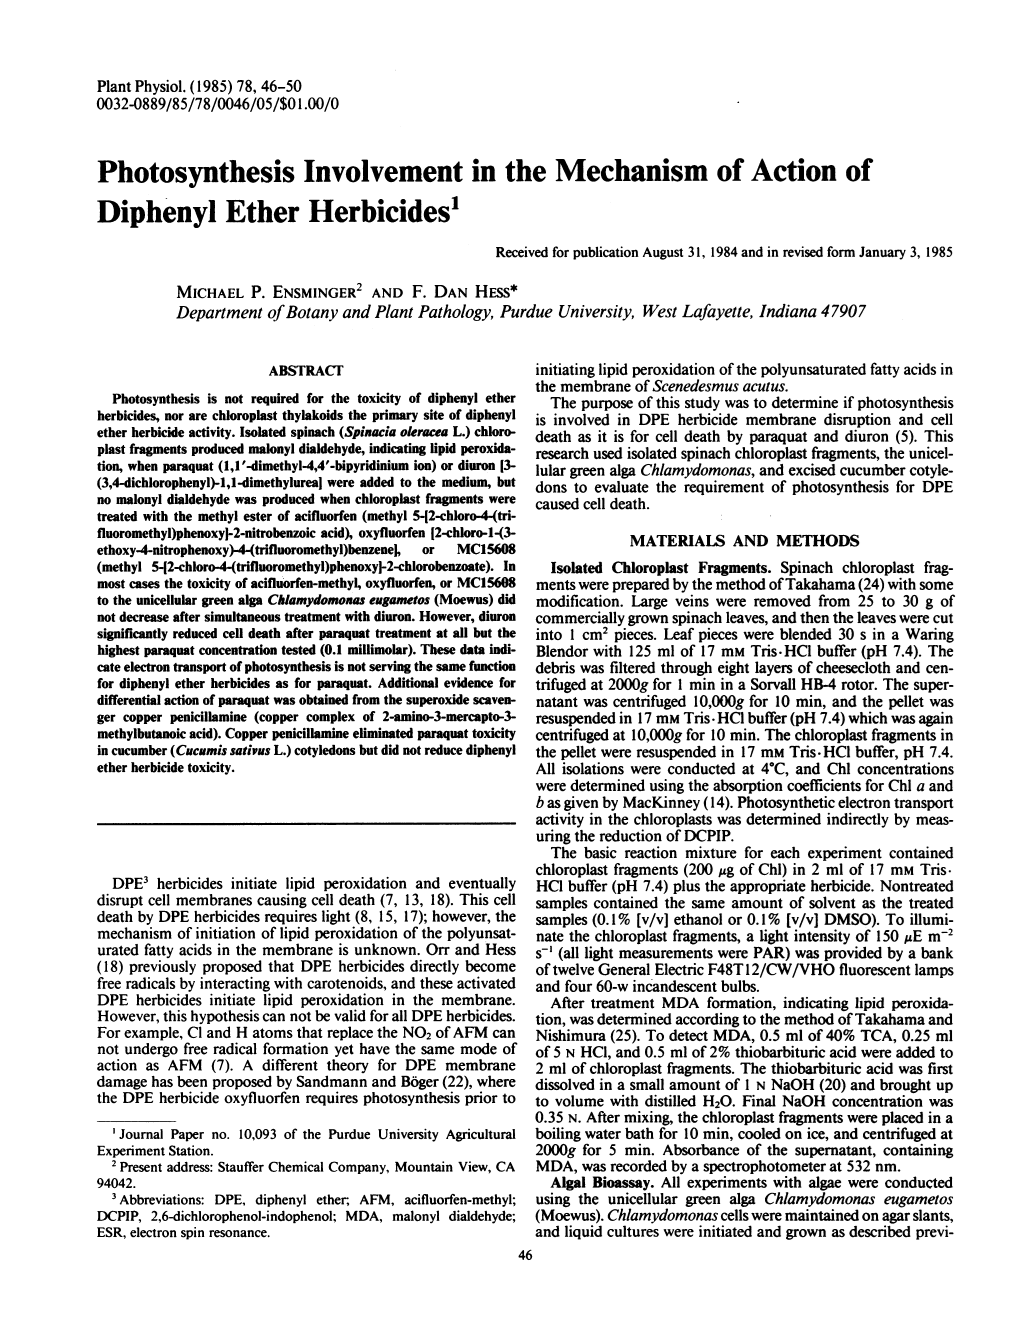 Diphenyl Ether Herbicides' Received for Publication August 31, 1984 and in Revised Form January 3, 1985